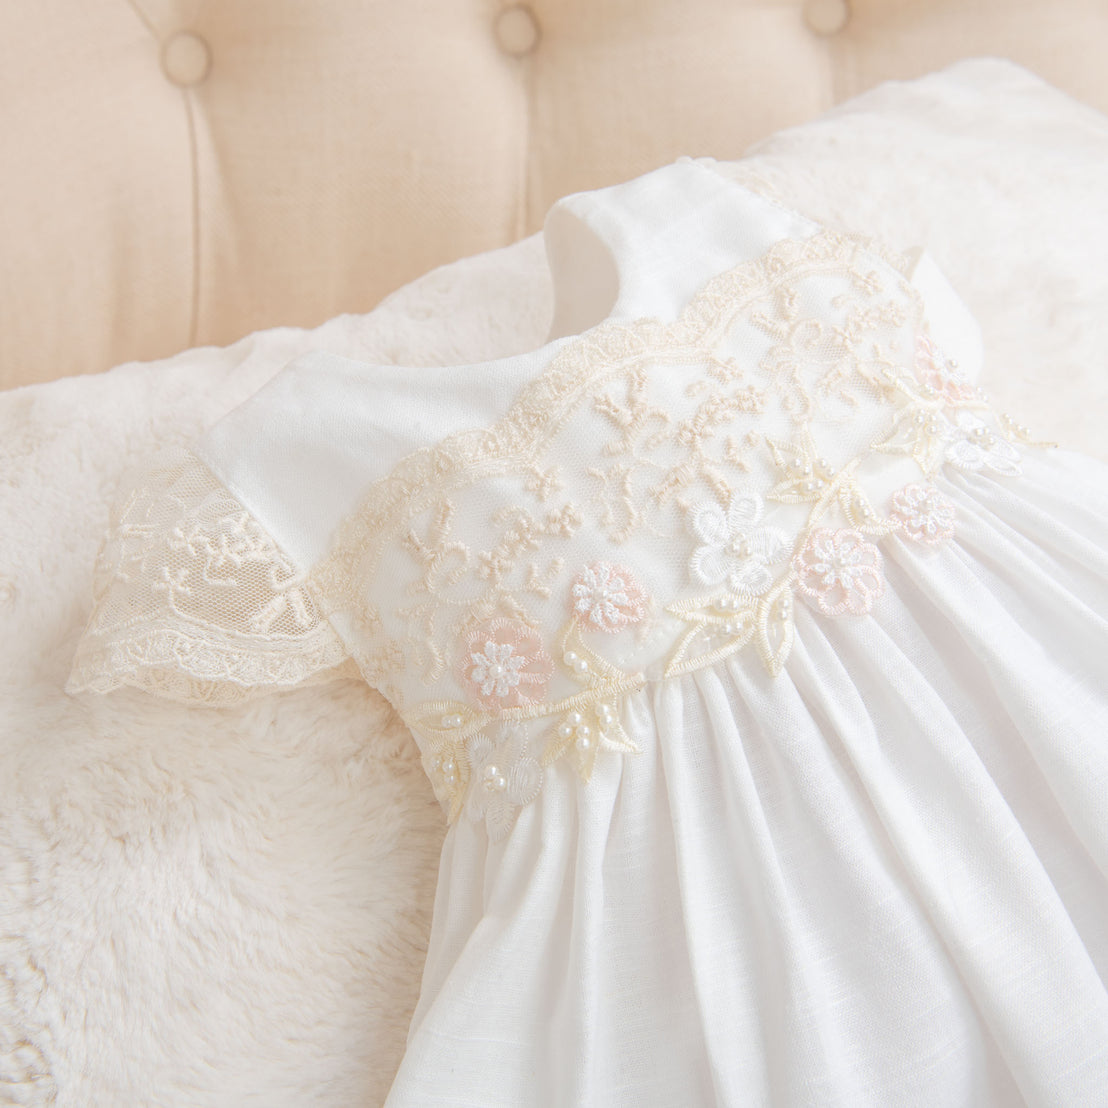 An elegant Jessica Linen Gown with delicate lace and floral embroidery detail, laid out on a soft, cream-colored cushioned background.